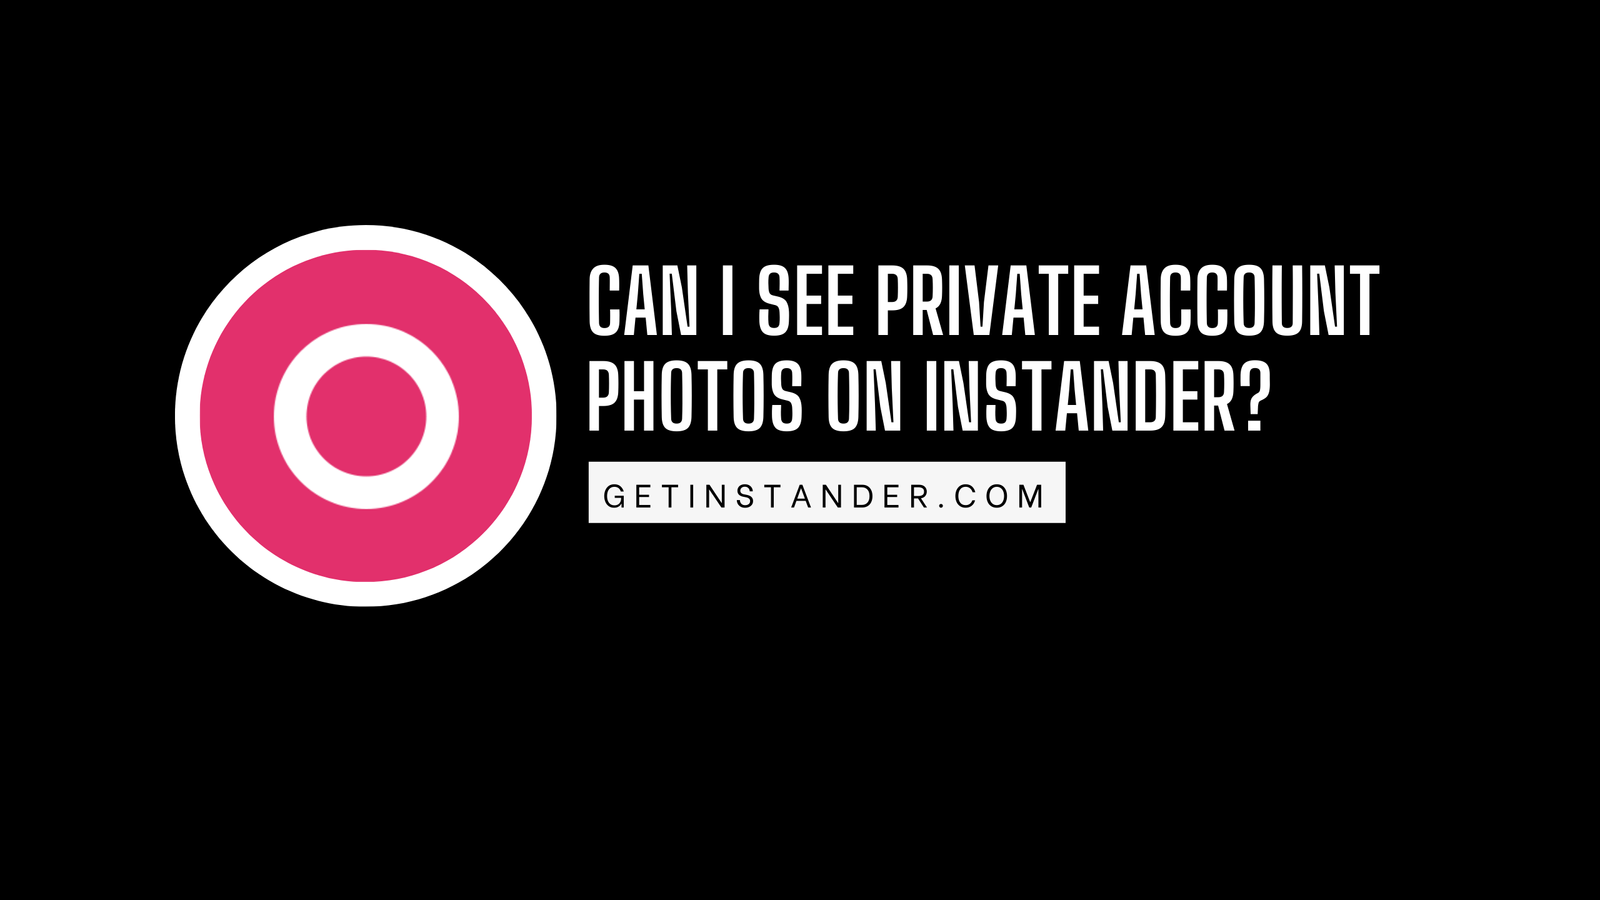 Can I See Private Account Photos on Instander?